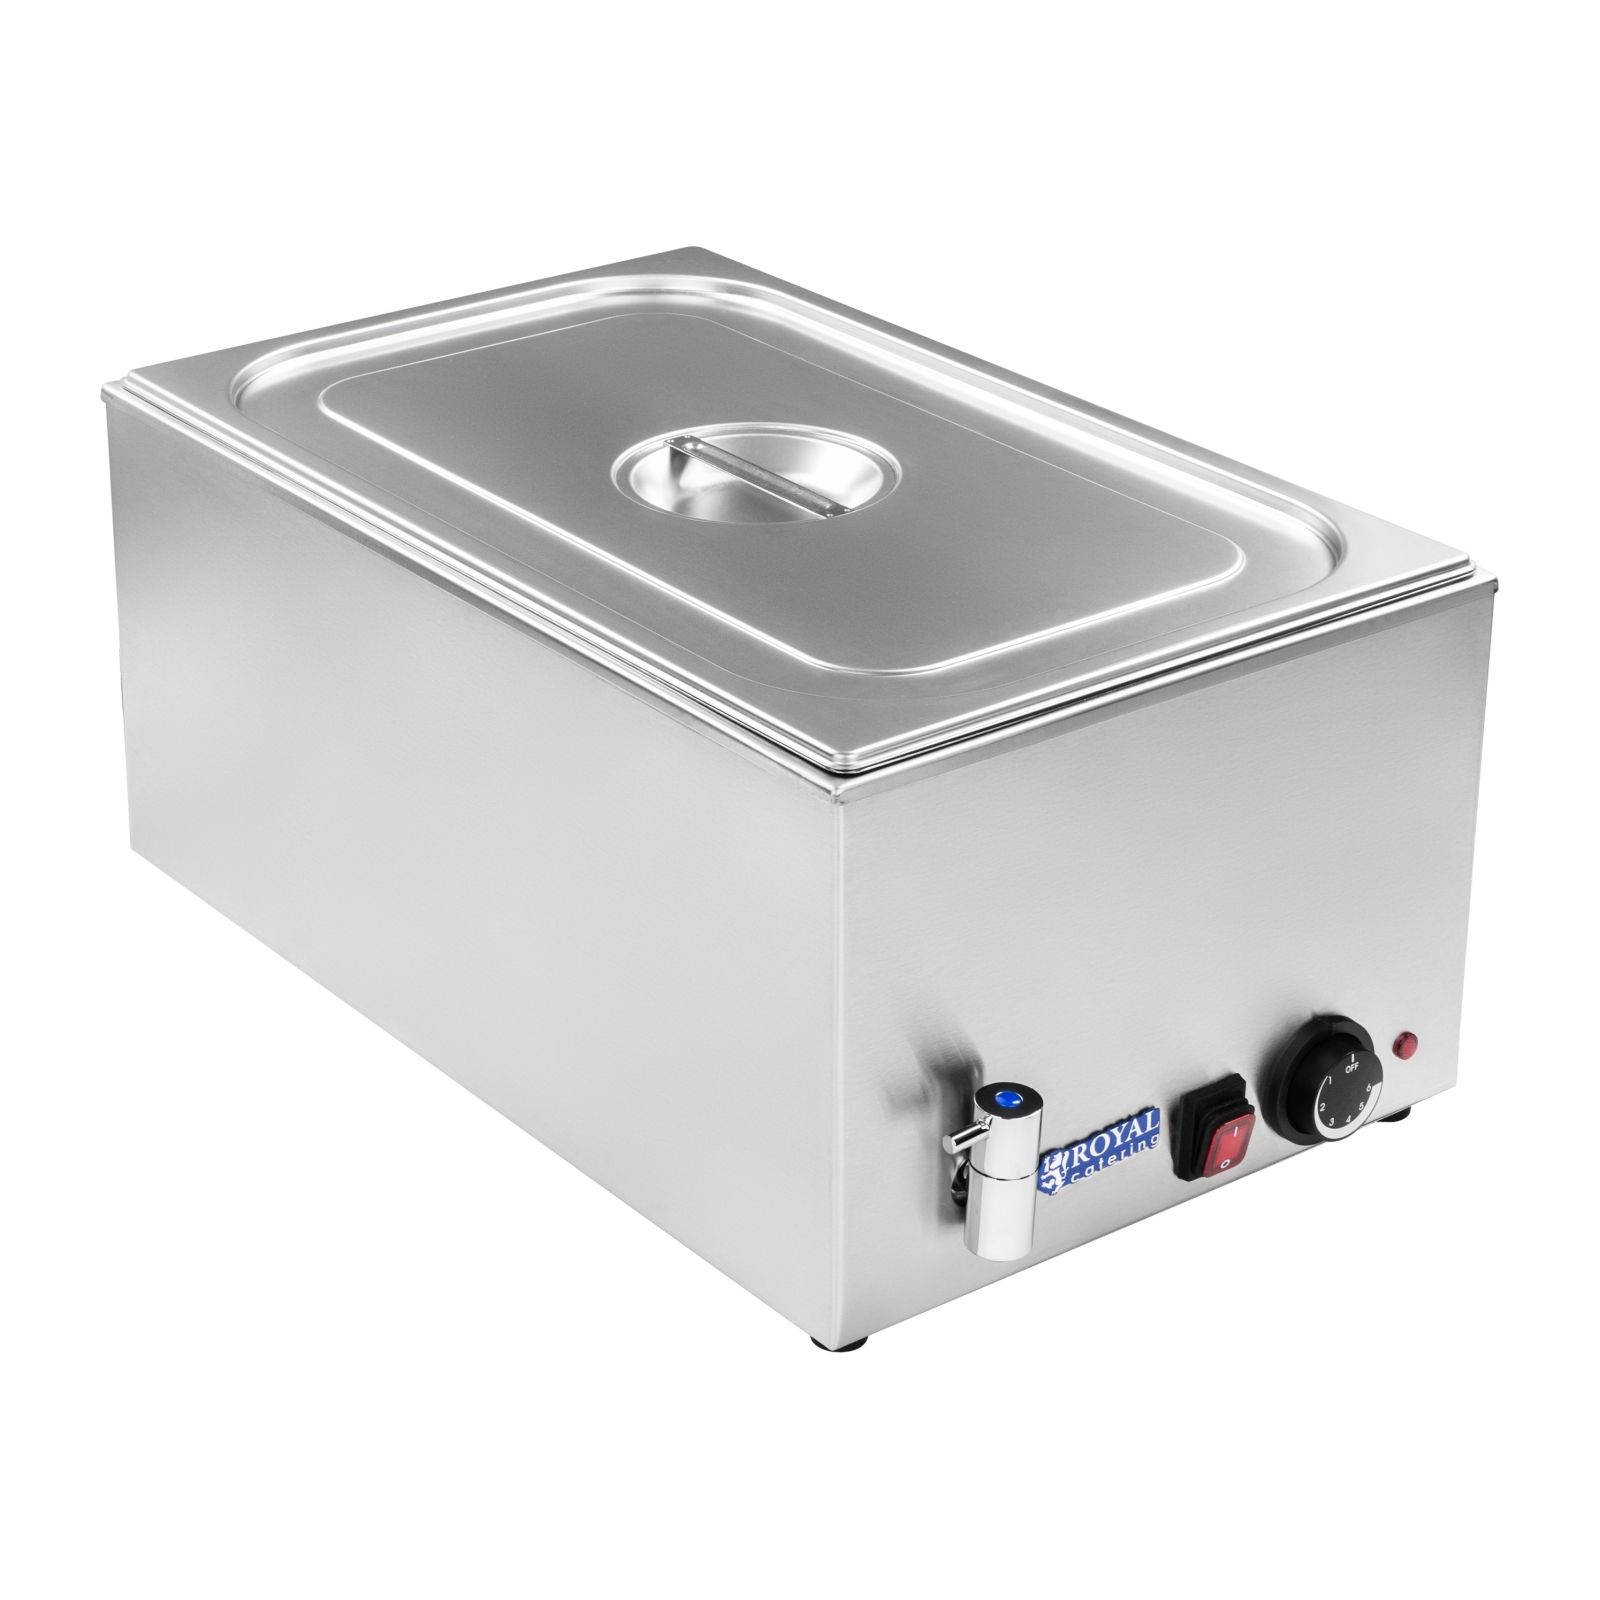 Royal Catering Bain-marie - GN container - 1/1 - drain tap RCBM-1/1-150A-GN